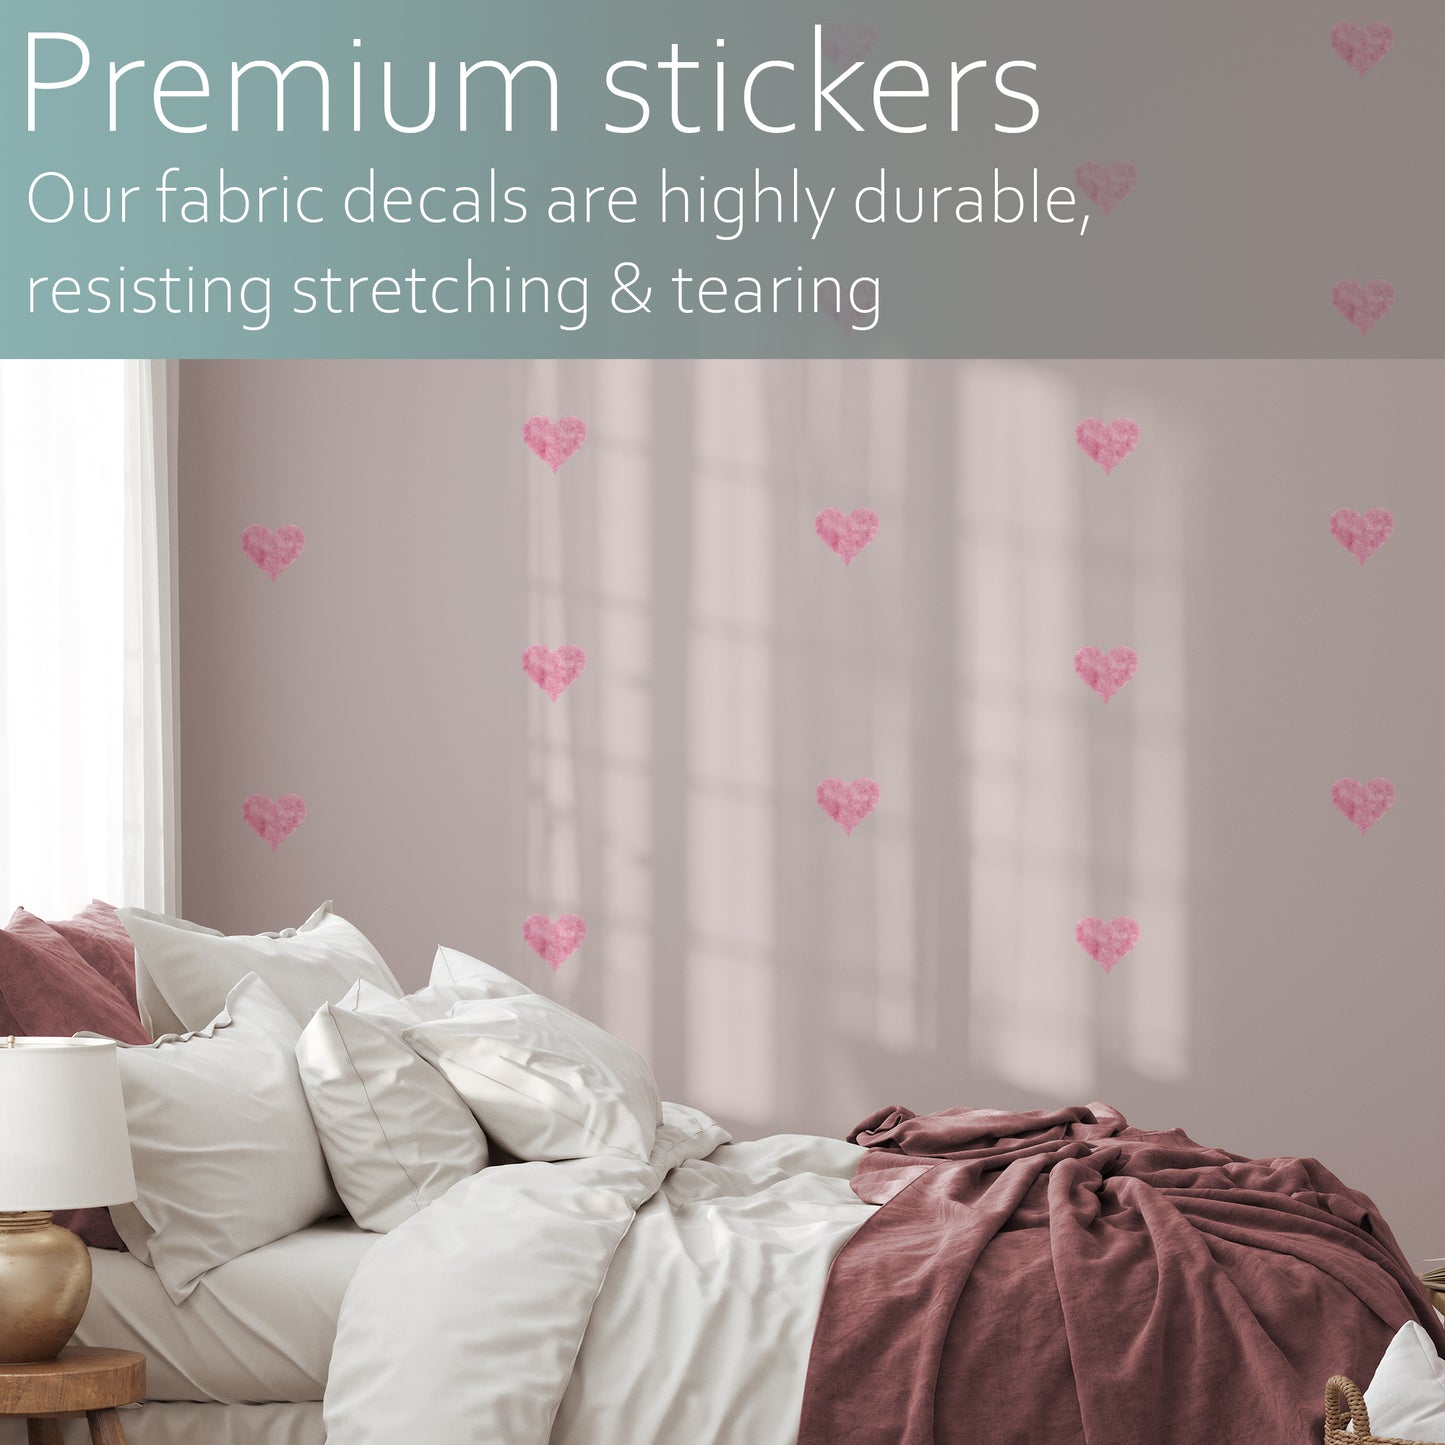 Watercolour pink hearts | Fabric wall stickers